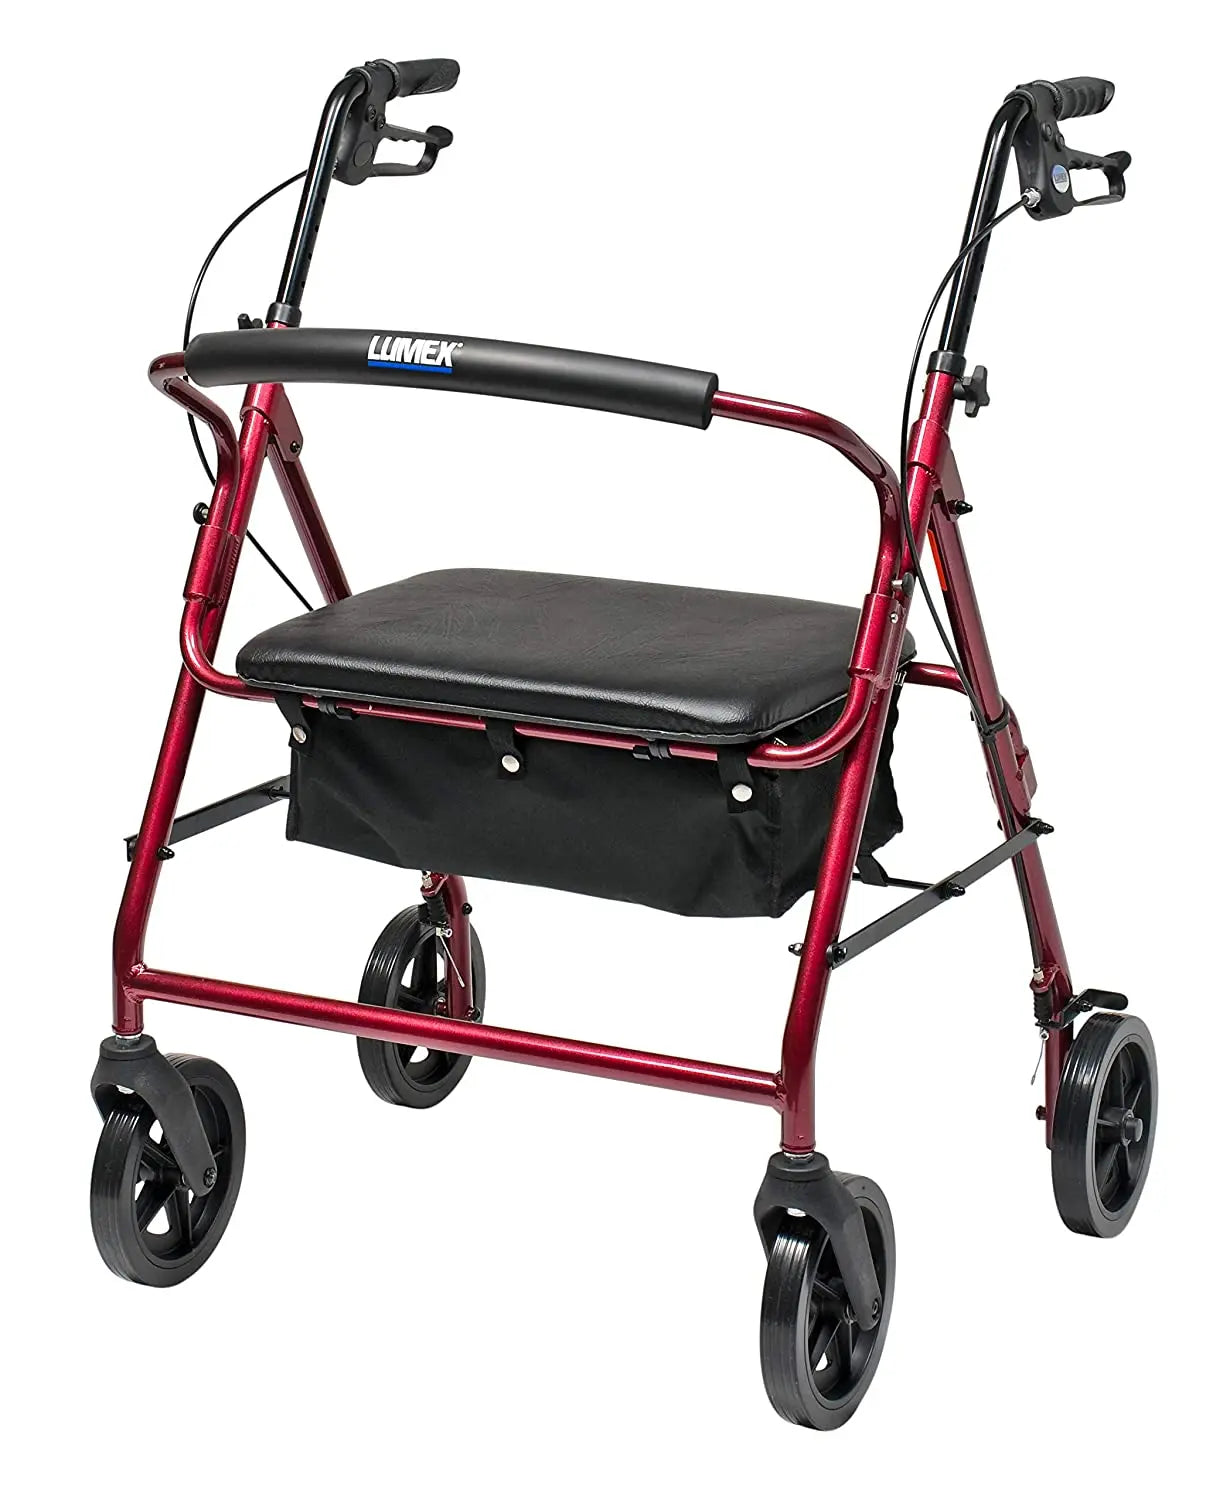 Walkabout Four-Wheel Imperial(Baristric) Rollator Hemi, Burgundy (Non-Returnable) - Ea/1 - Home Health Store Inc